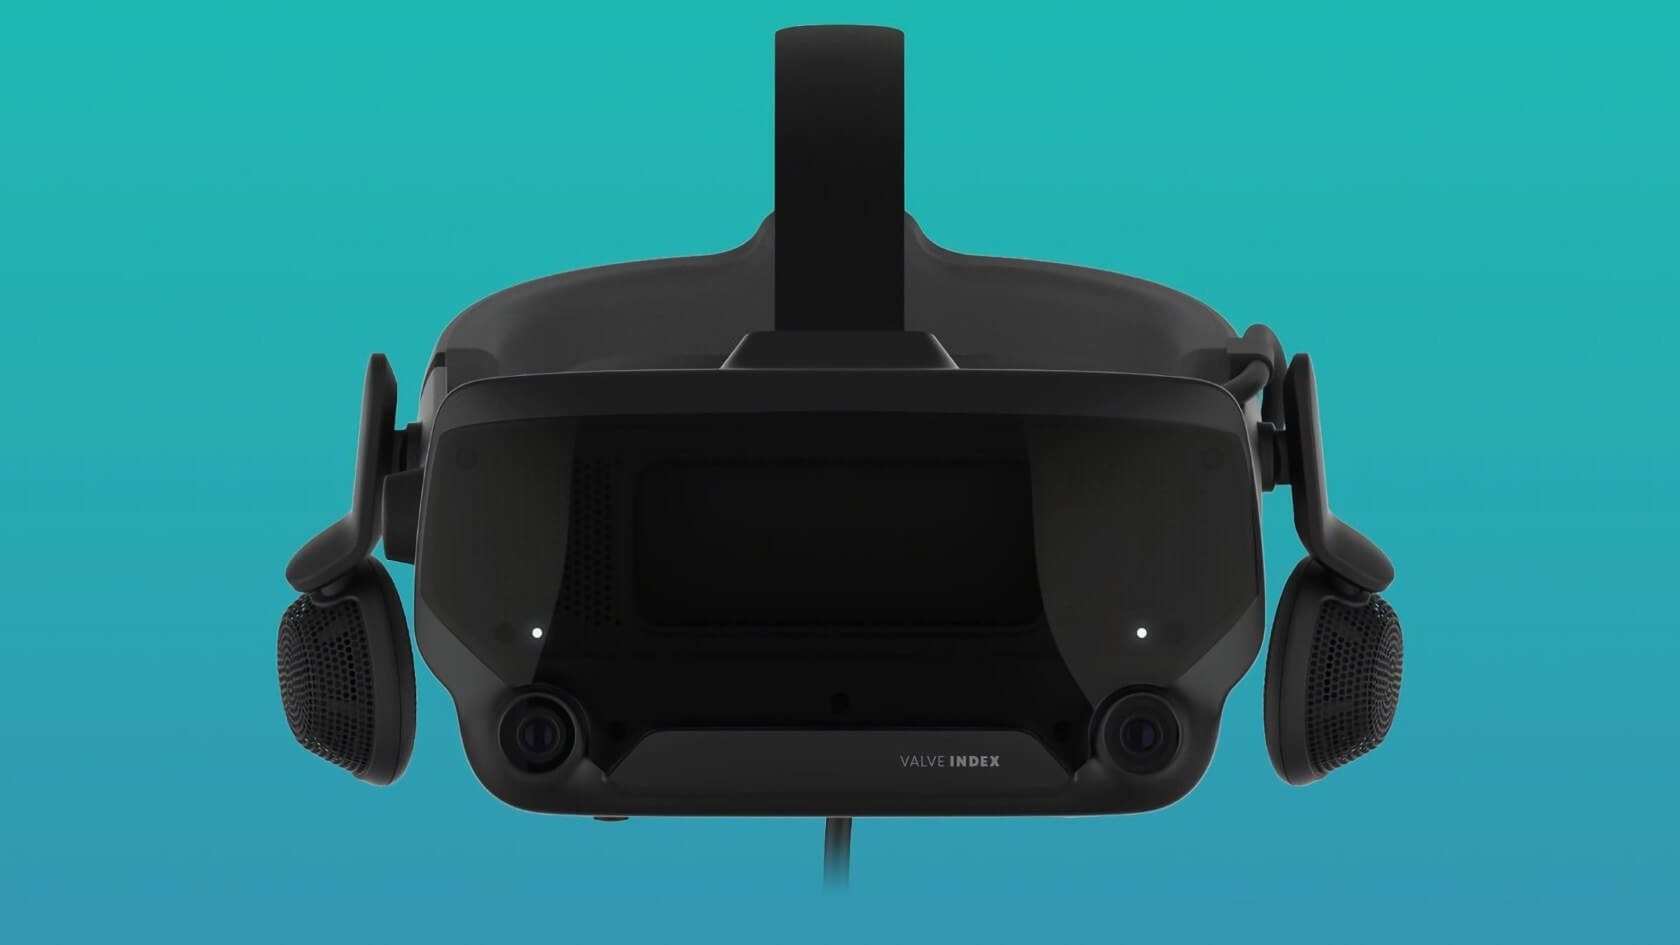 Valve's 'Index' VR headset launches on June 15